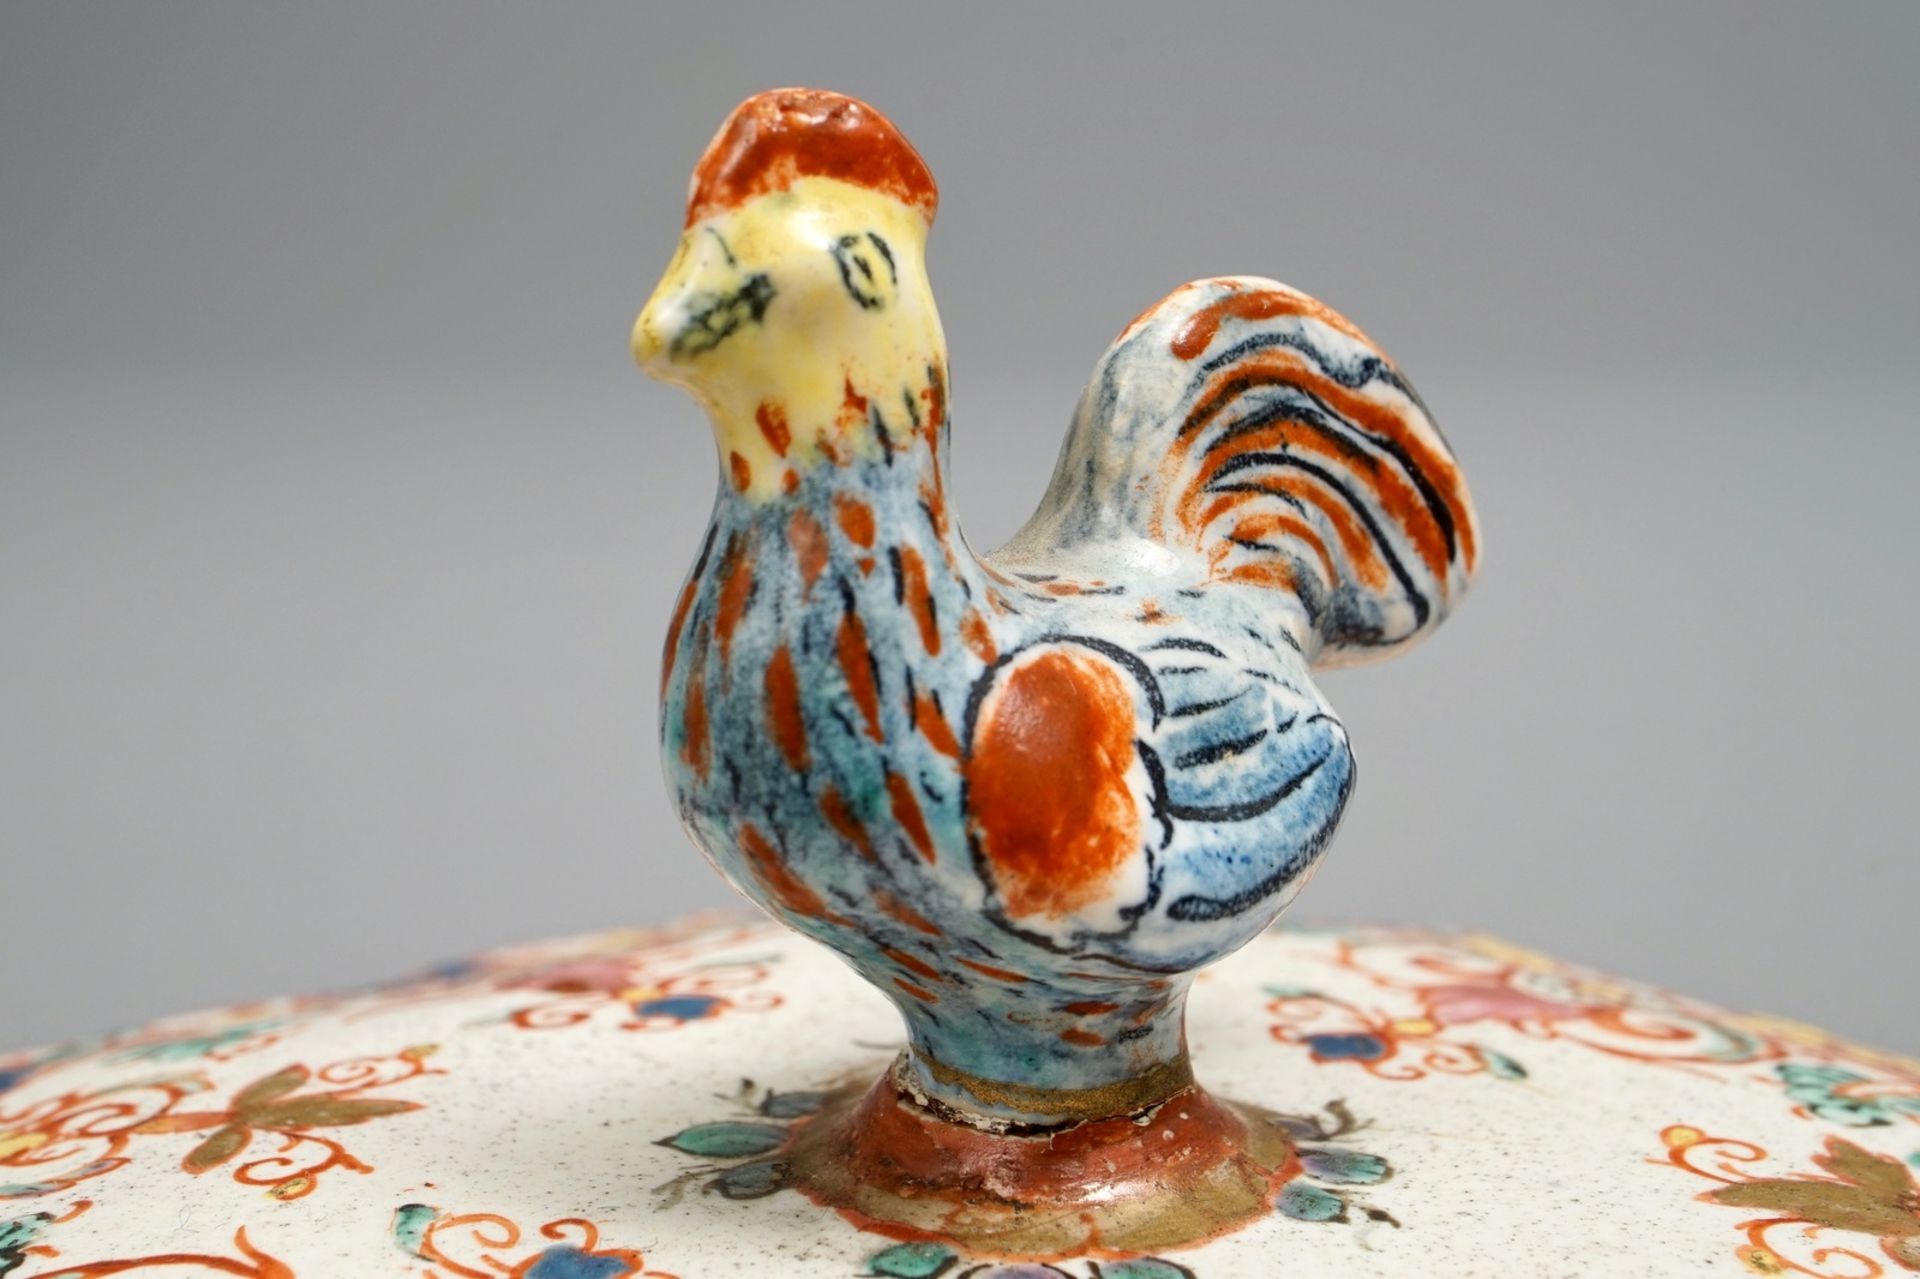 A polychrome petit feu and gilded Dutch Delft rooster-topped butter tub, 1st half 18th C. - Image 8 of 8